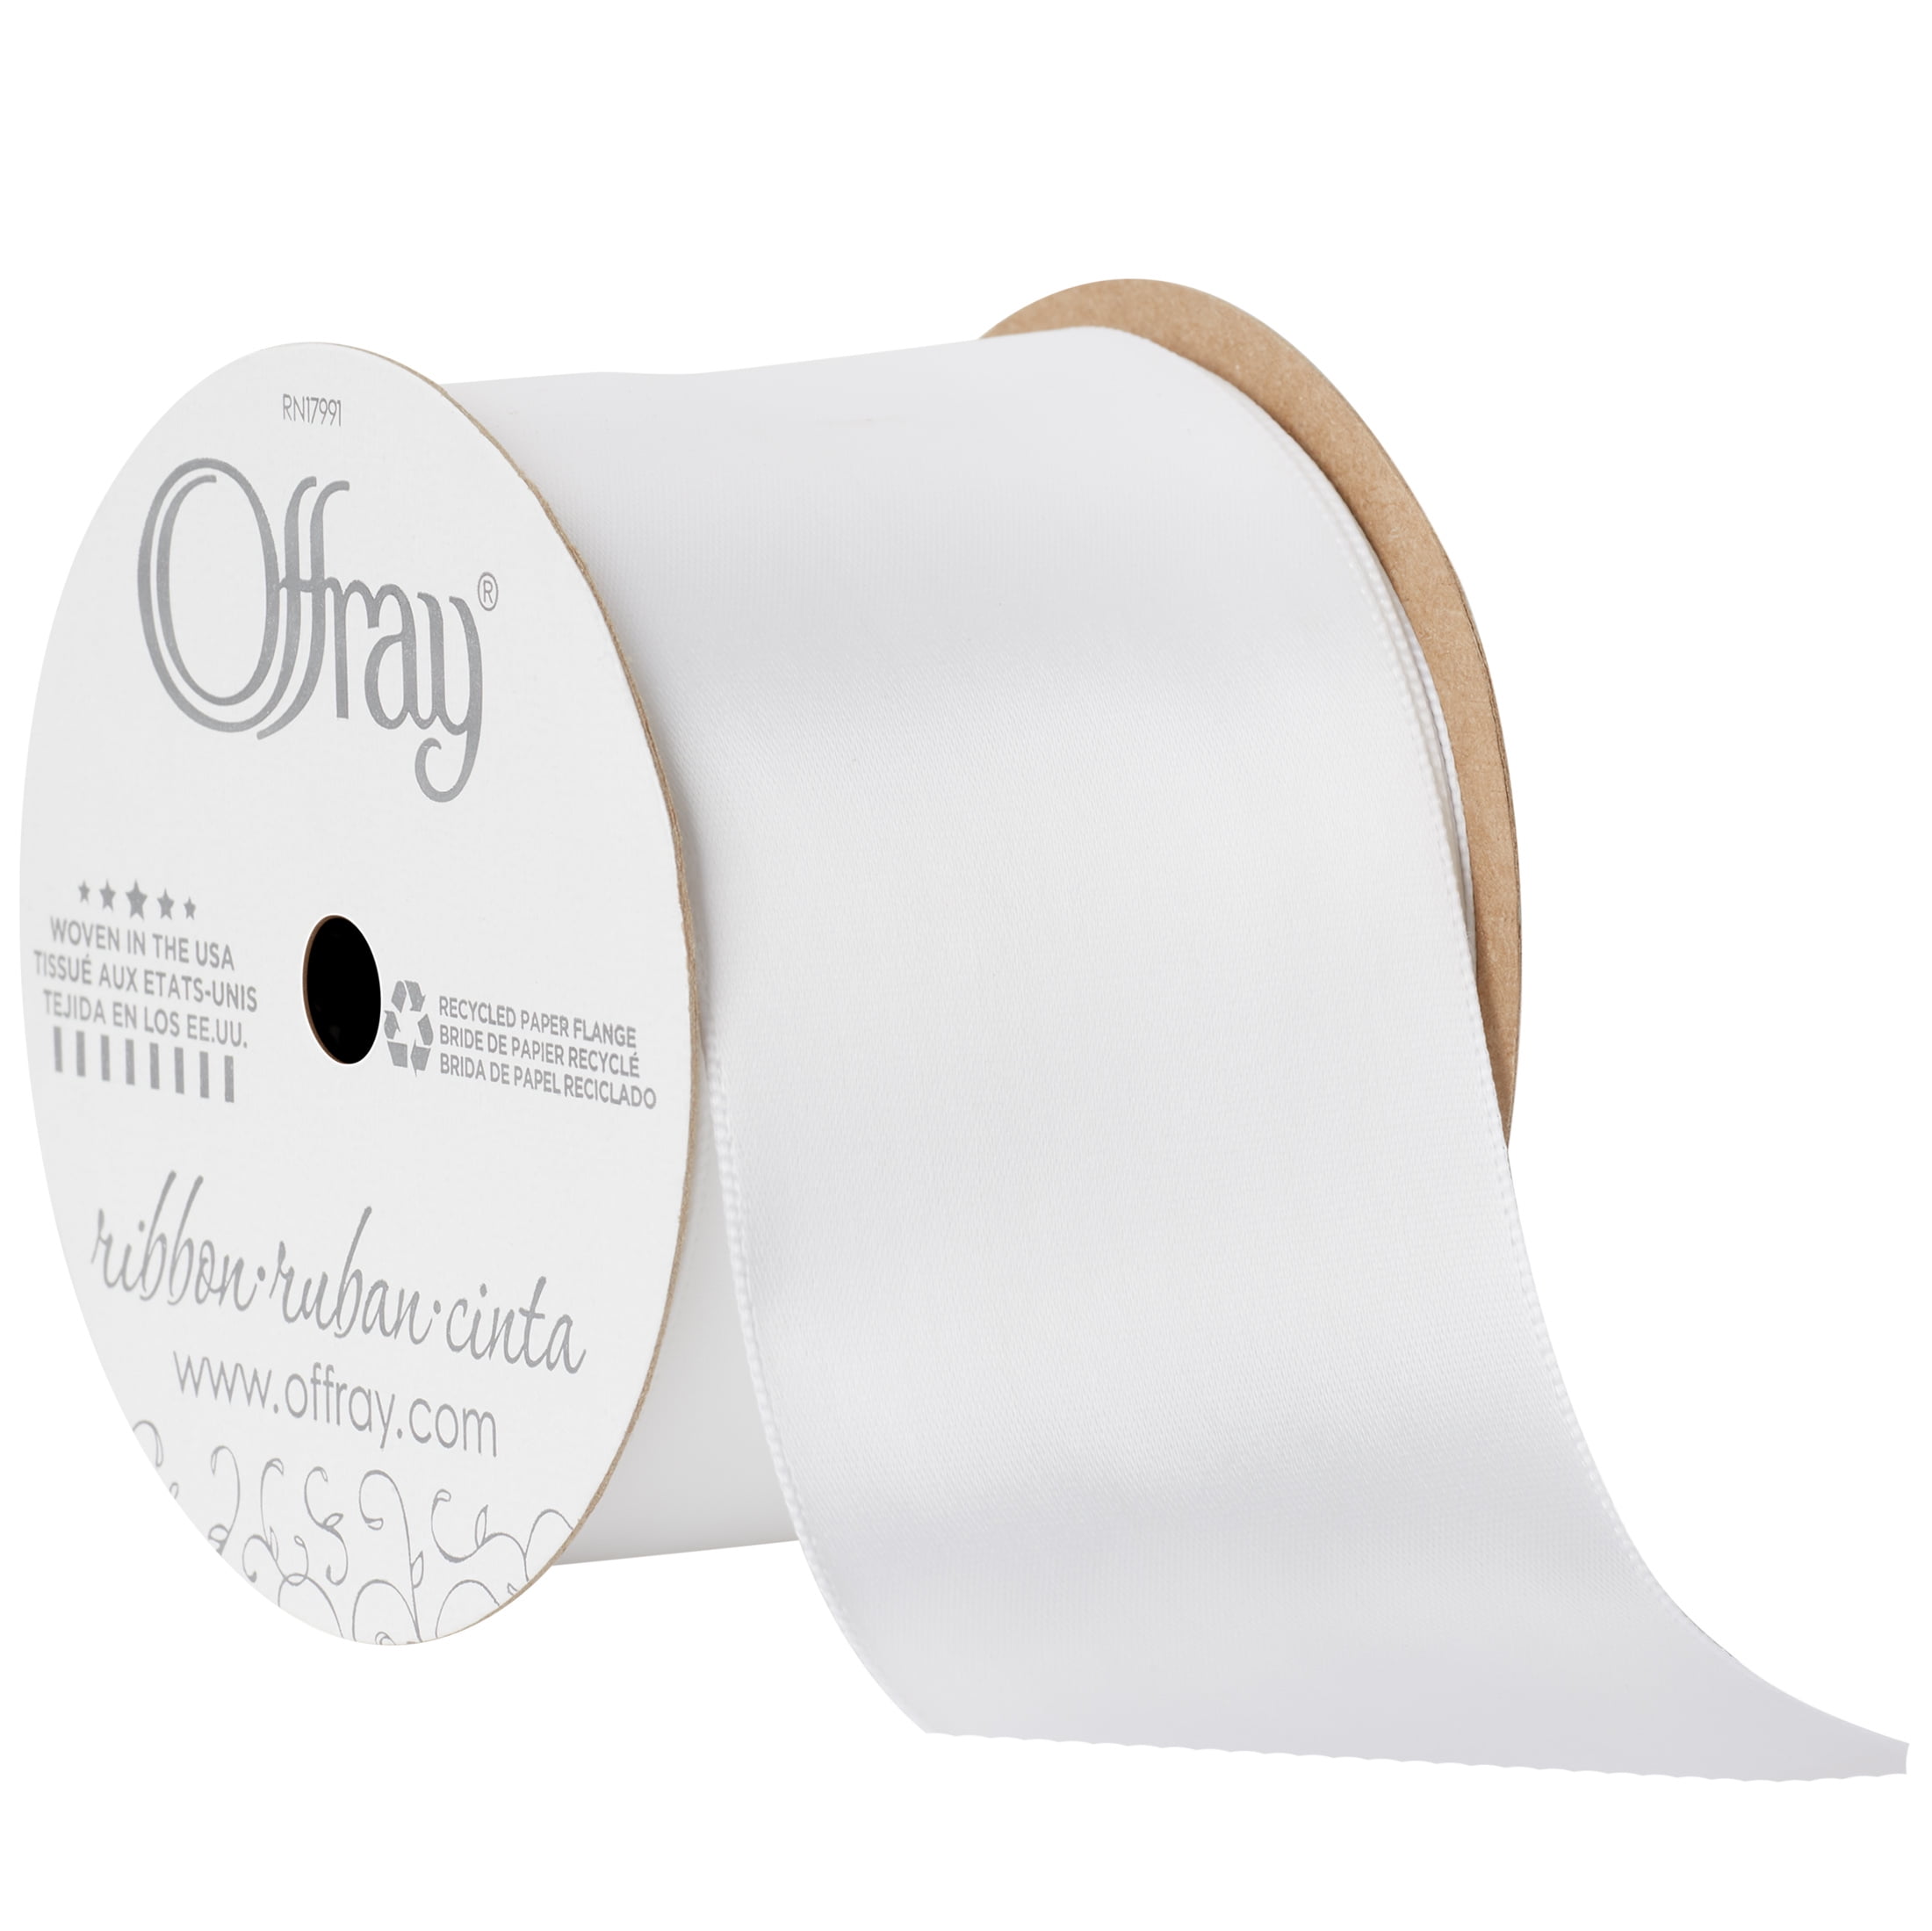 Offray Ribbon, White and Silver 3/8 inch Our Wedding Expression Ribbon, 9  feet 